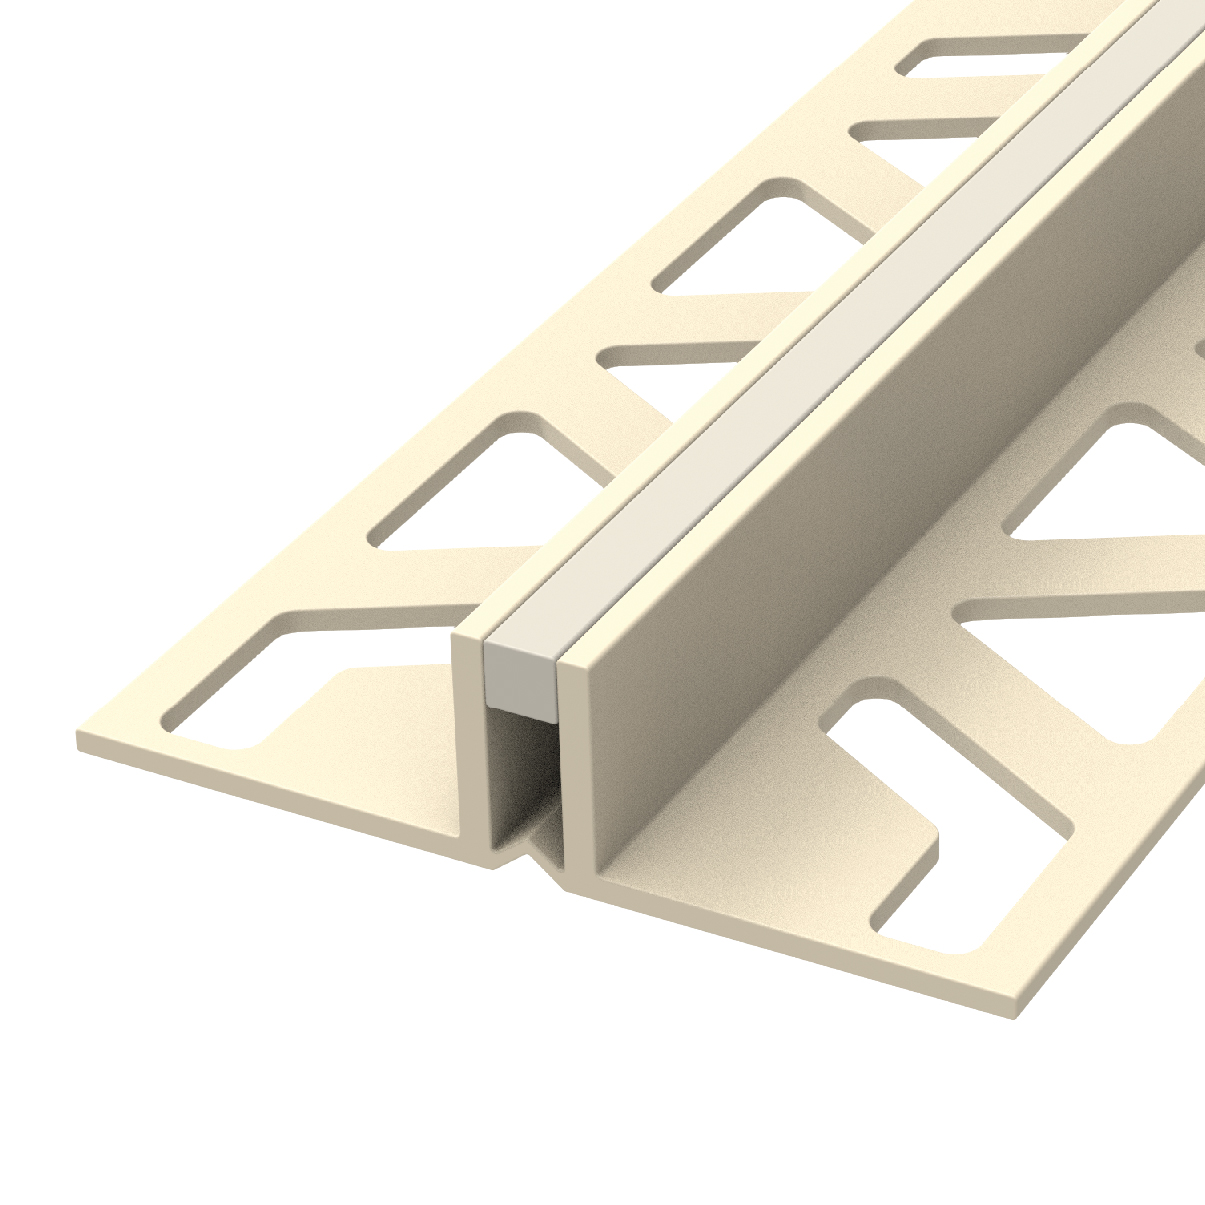 PVC Thermal Movement Joint Profiles for Interiors